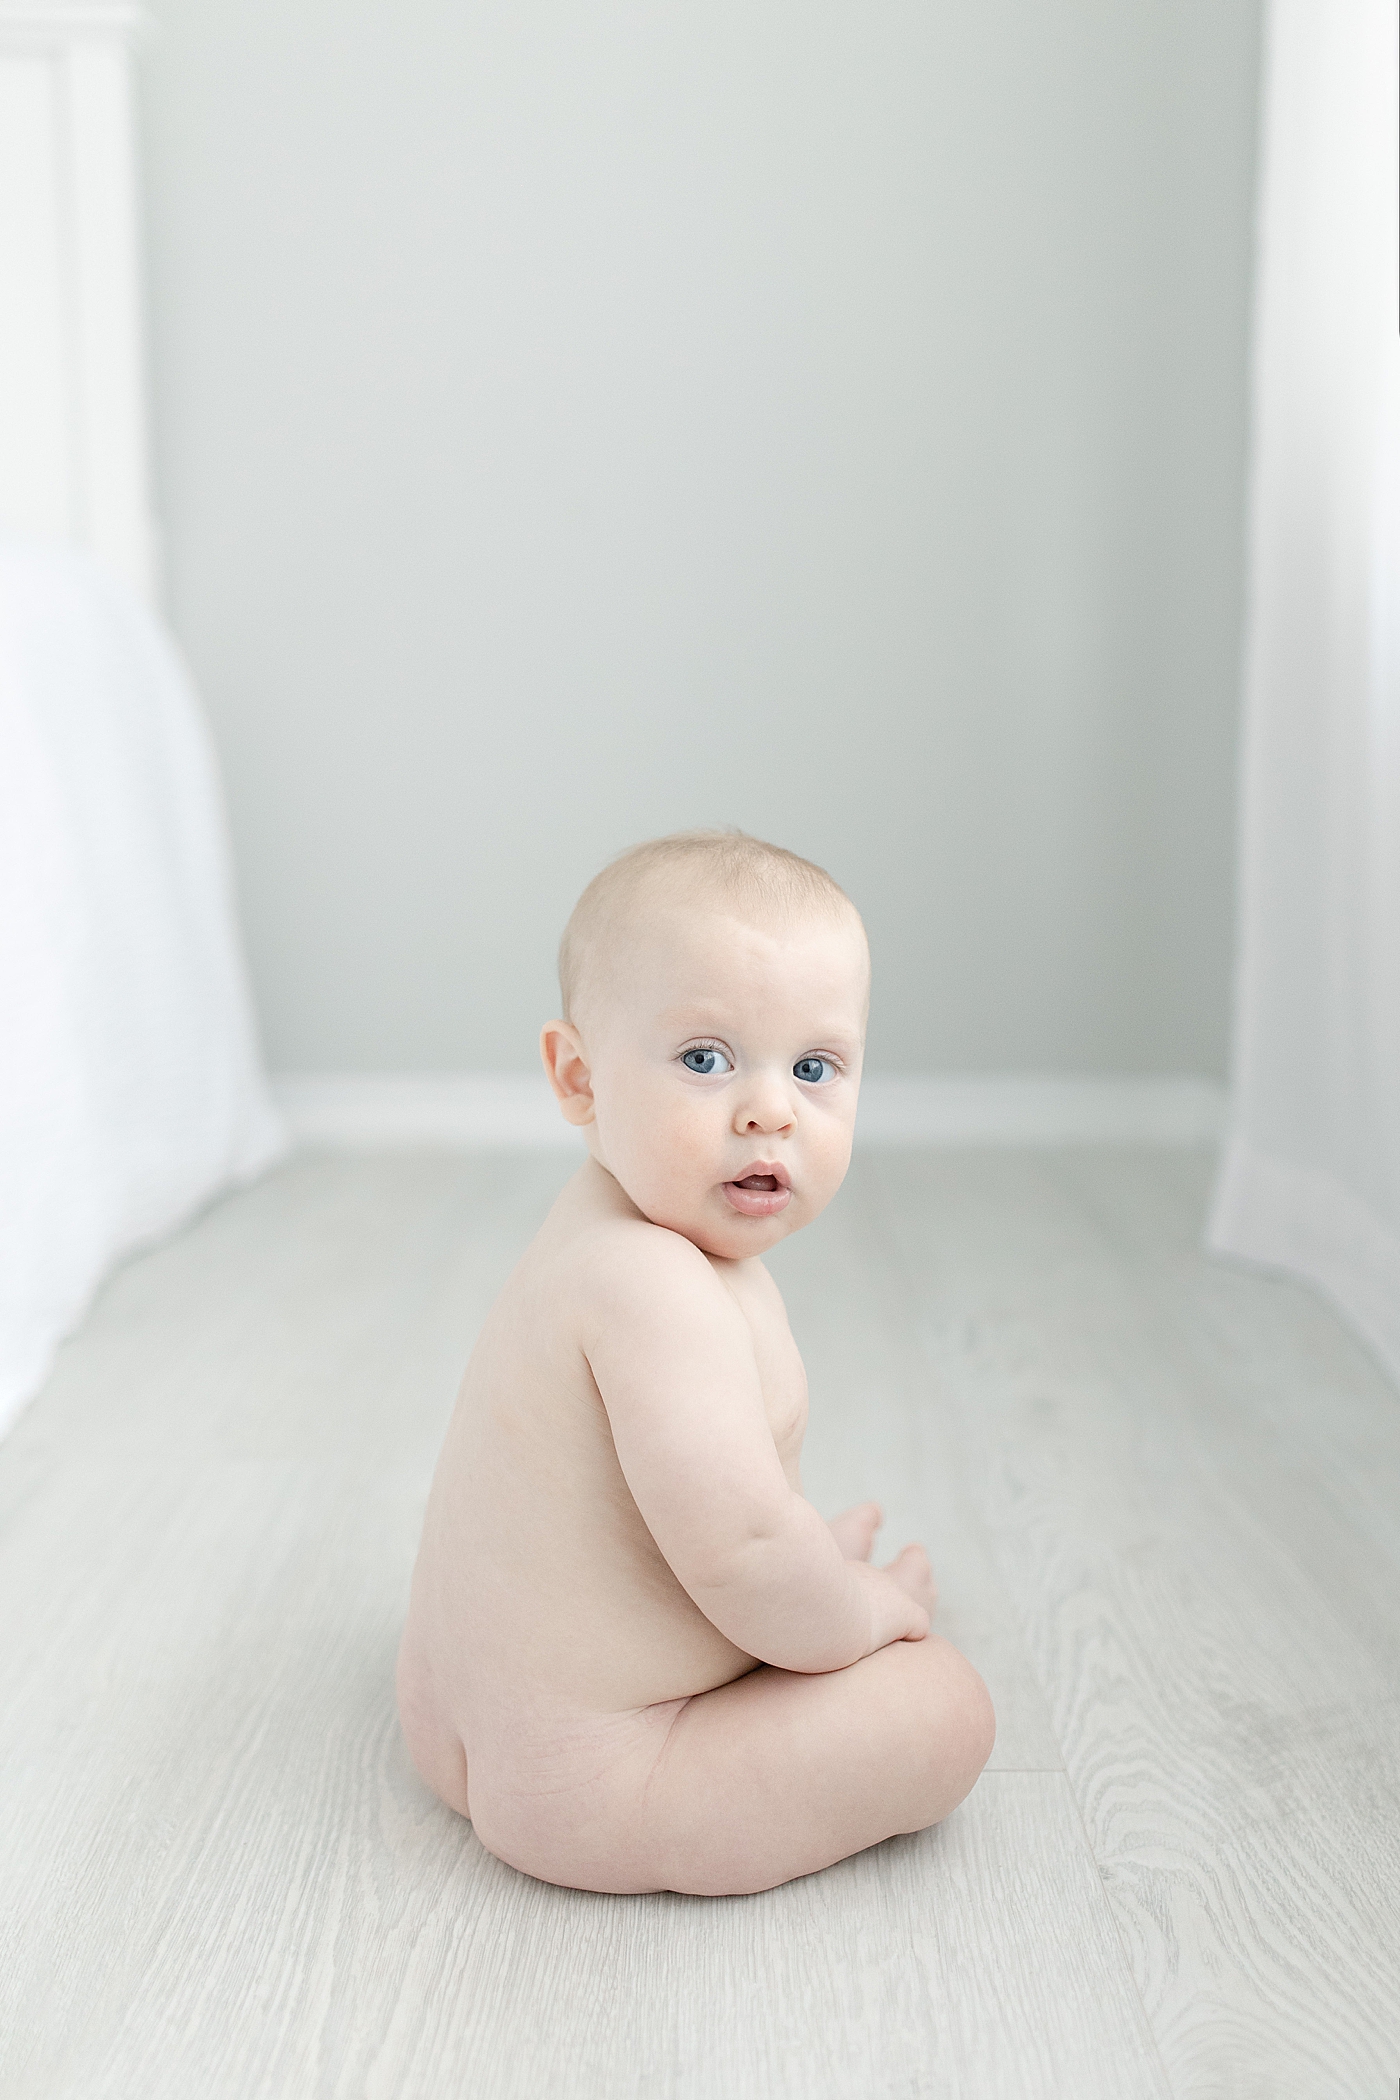 Baby boy sitting on the floor | Photo by Little Sunshine Photography